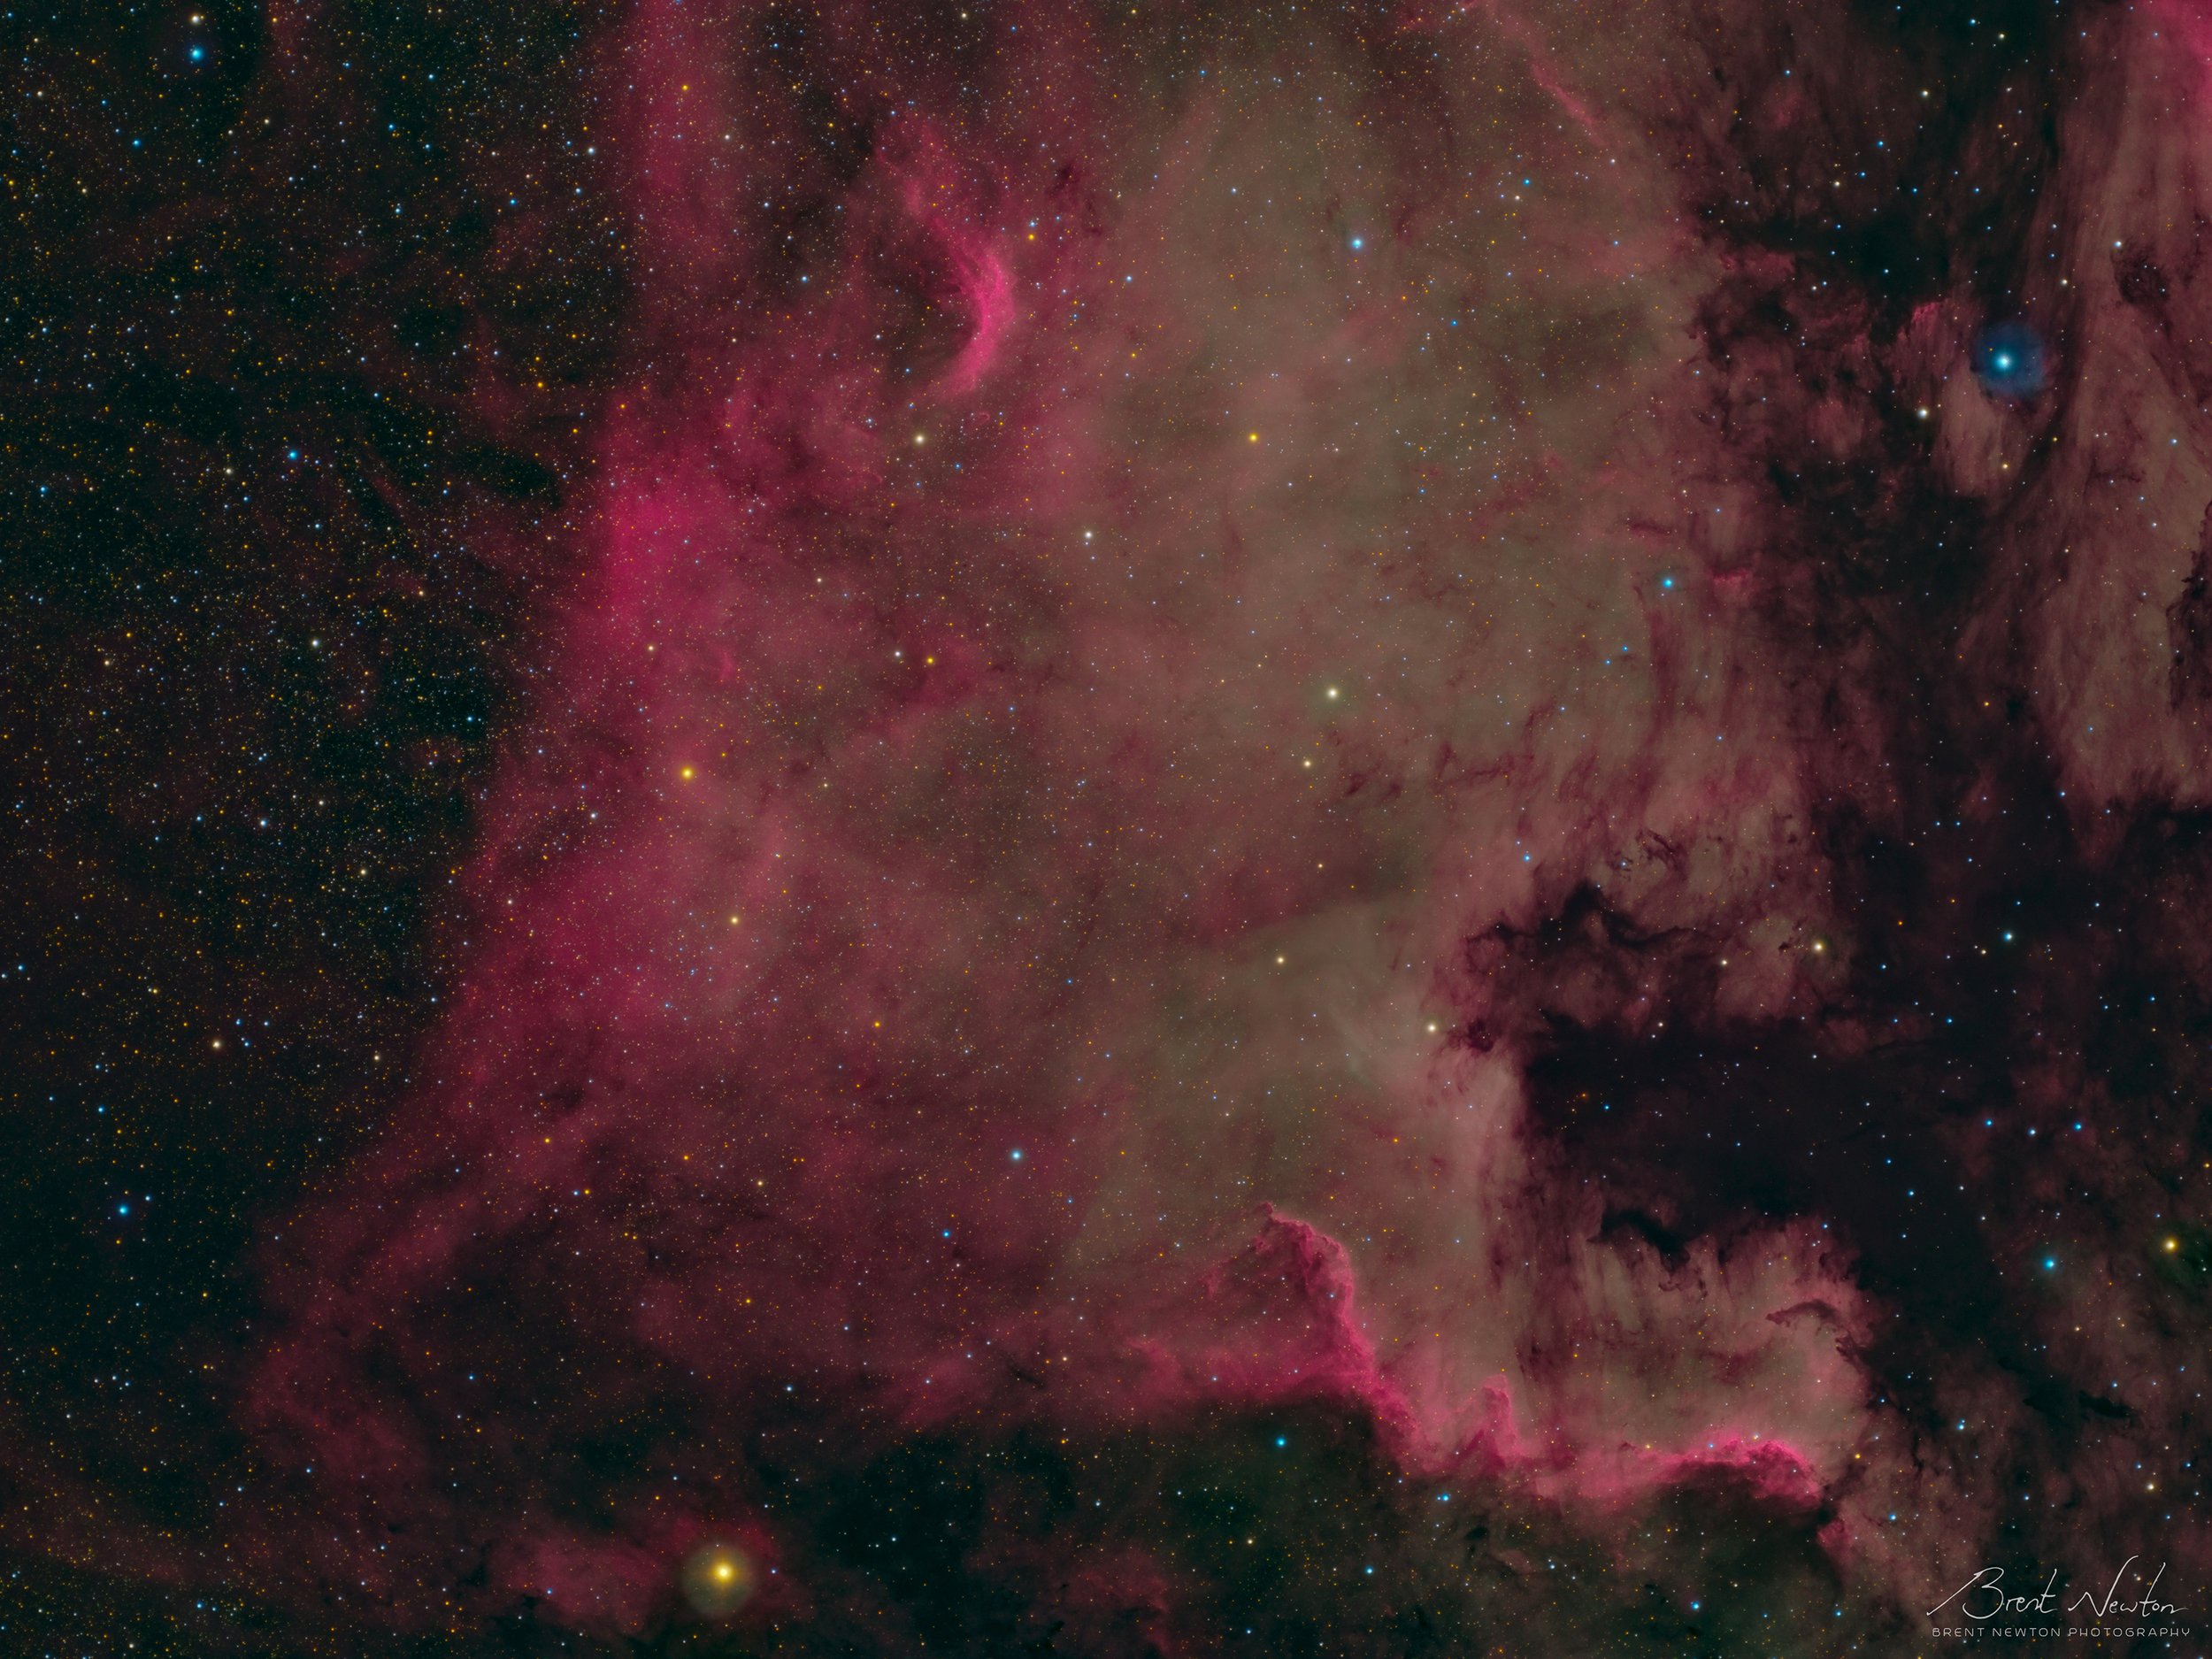 "Accurate" Narrowband blend